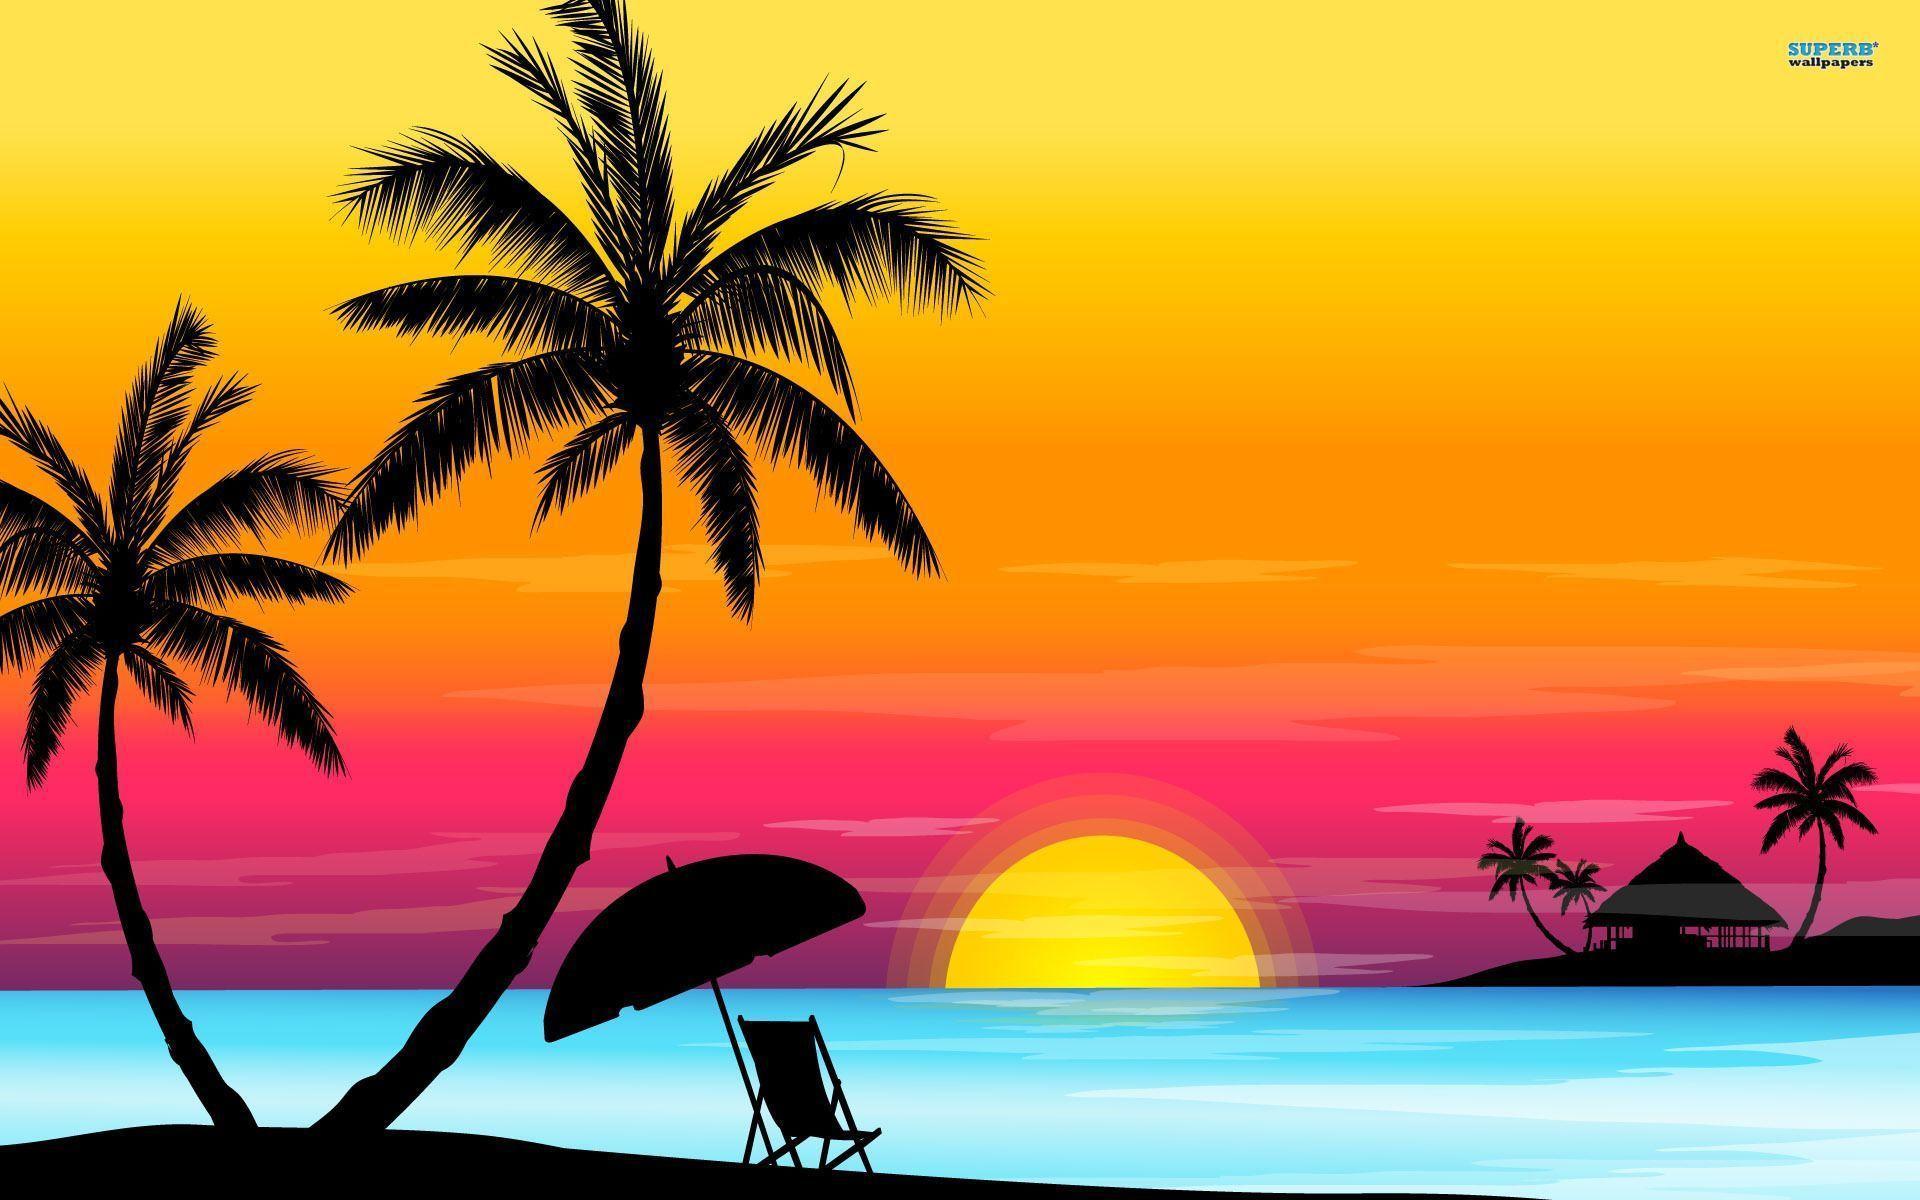 Sunset Beach High Quality Image For Desktop Background